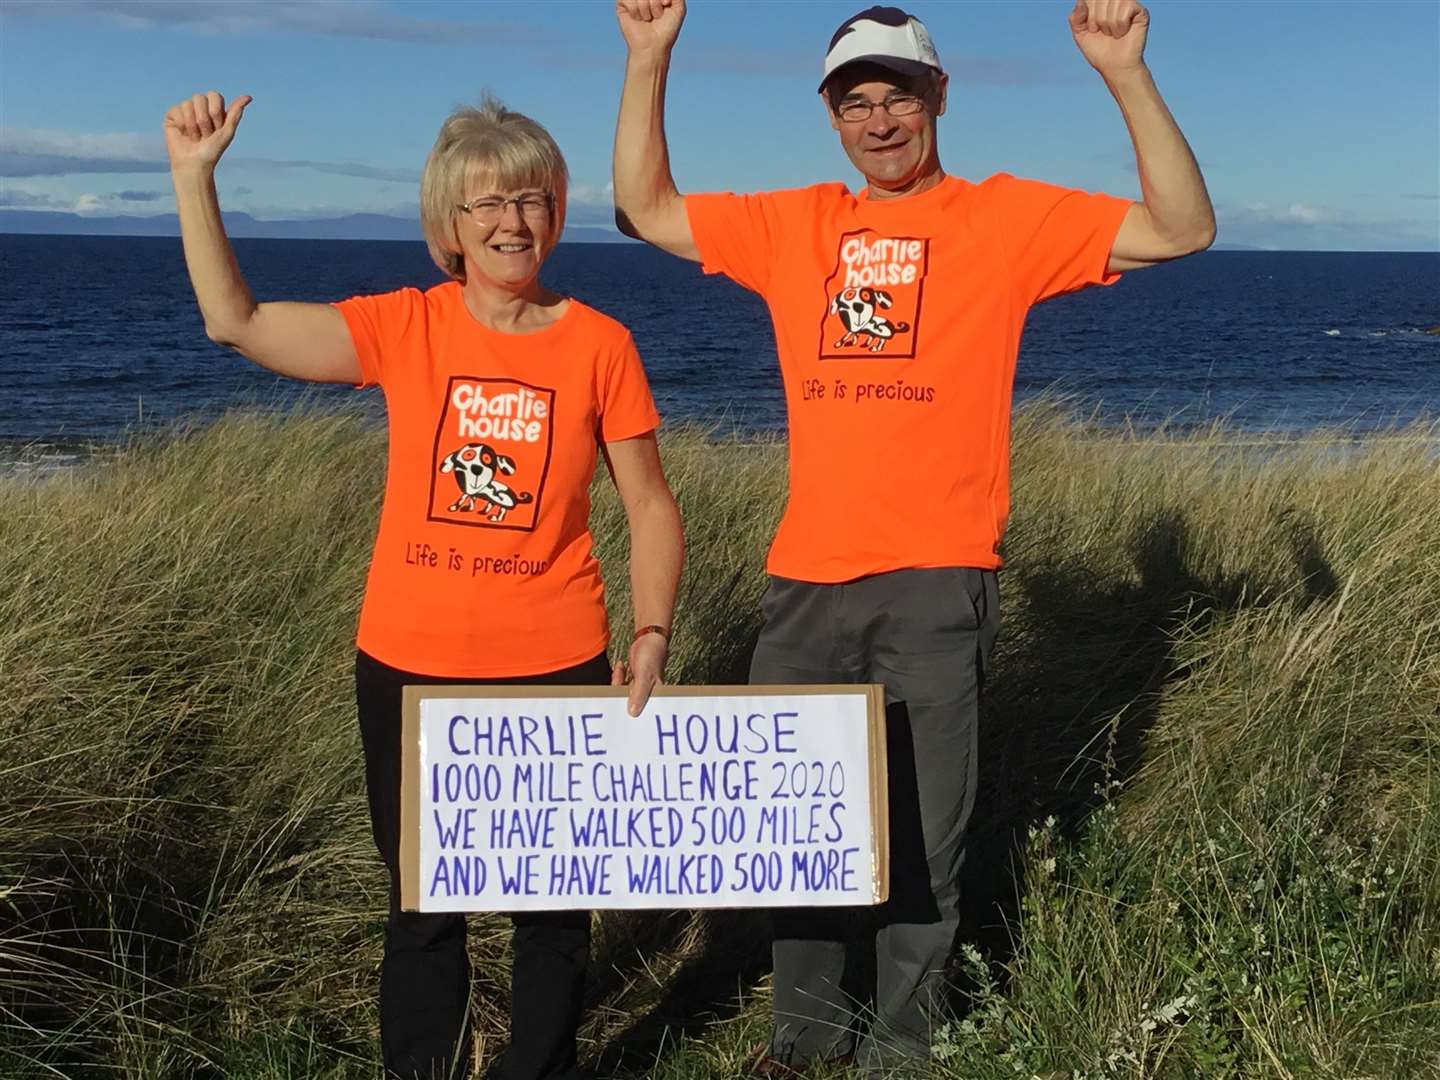 Alan and Sheila Williamson, from Kintore, have raised £2600 so far by completing the Charlie House 1000 Miles Challenge 2020.